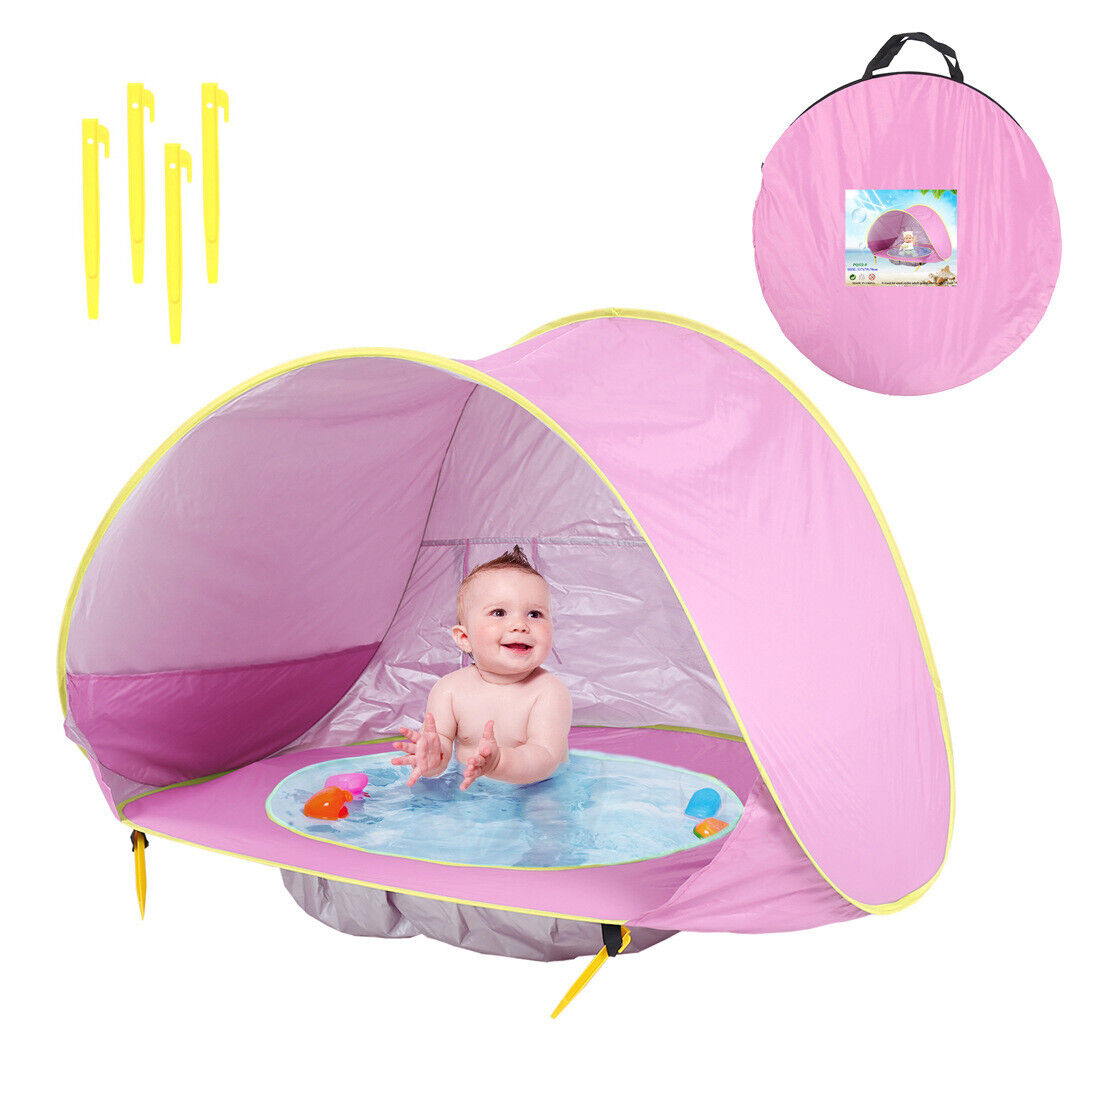 Outdoor Foldable Beach Tent Portable Sun' Shade Shelter Pool for Kids Baby Toys